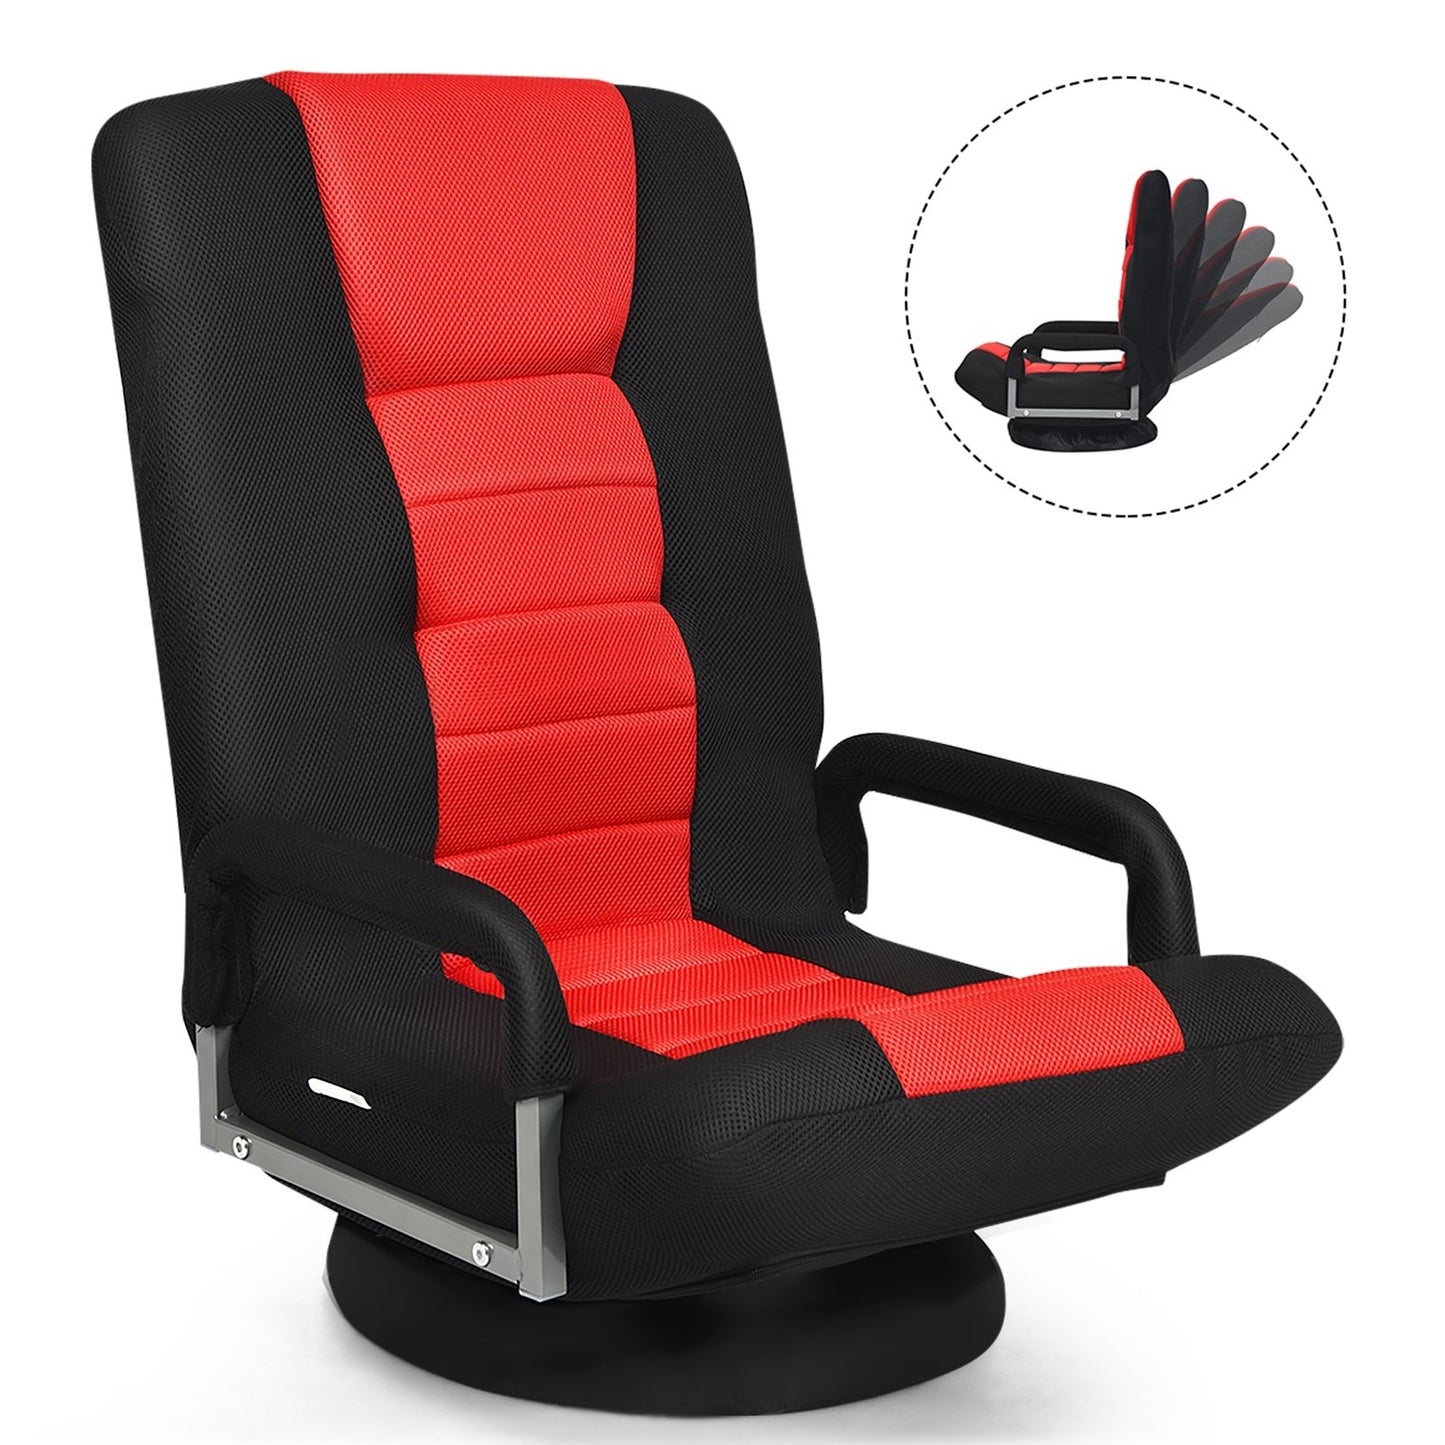 360-Degree Swivel Gaming Floor Chair with Foldable Adjustable Backrest, Red - Gallery Canada